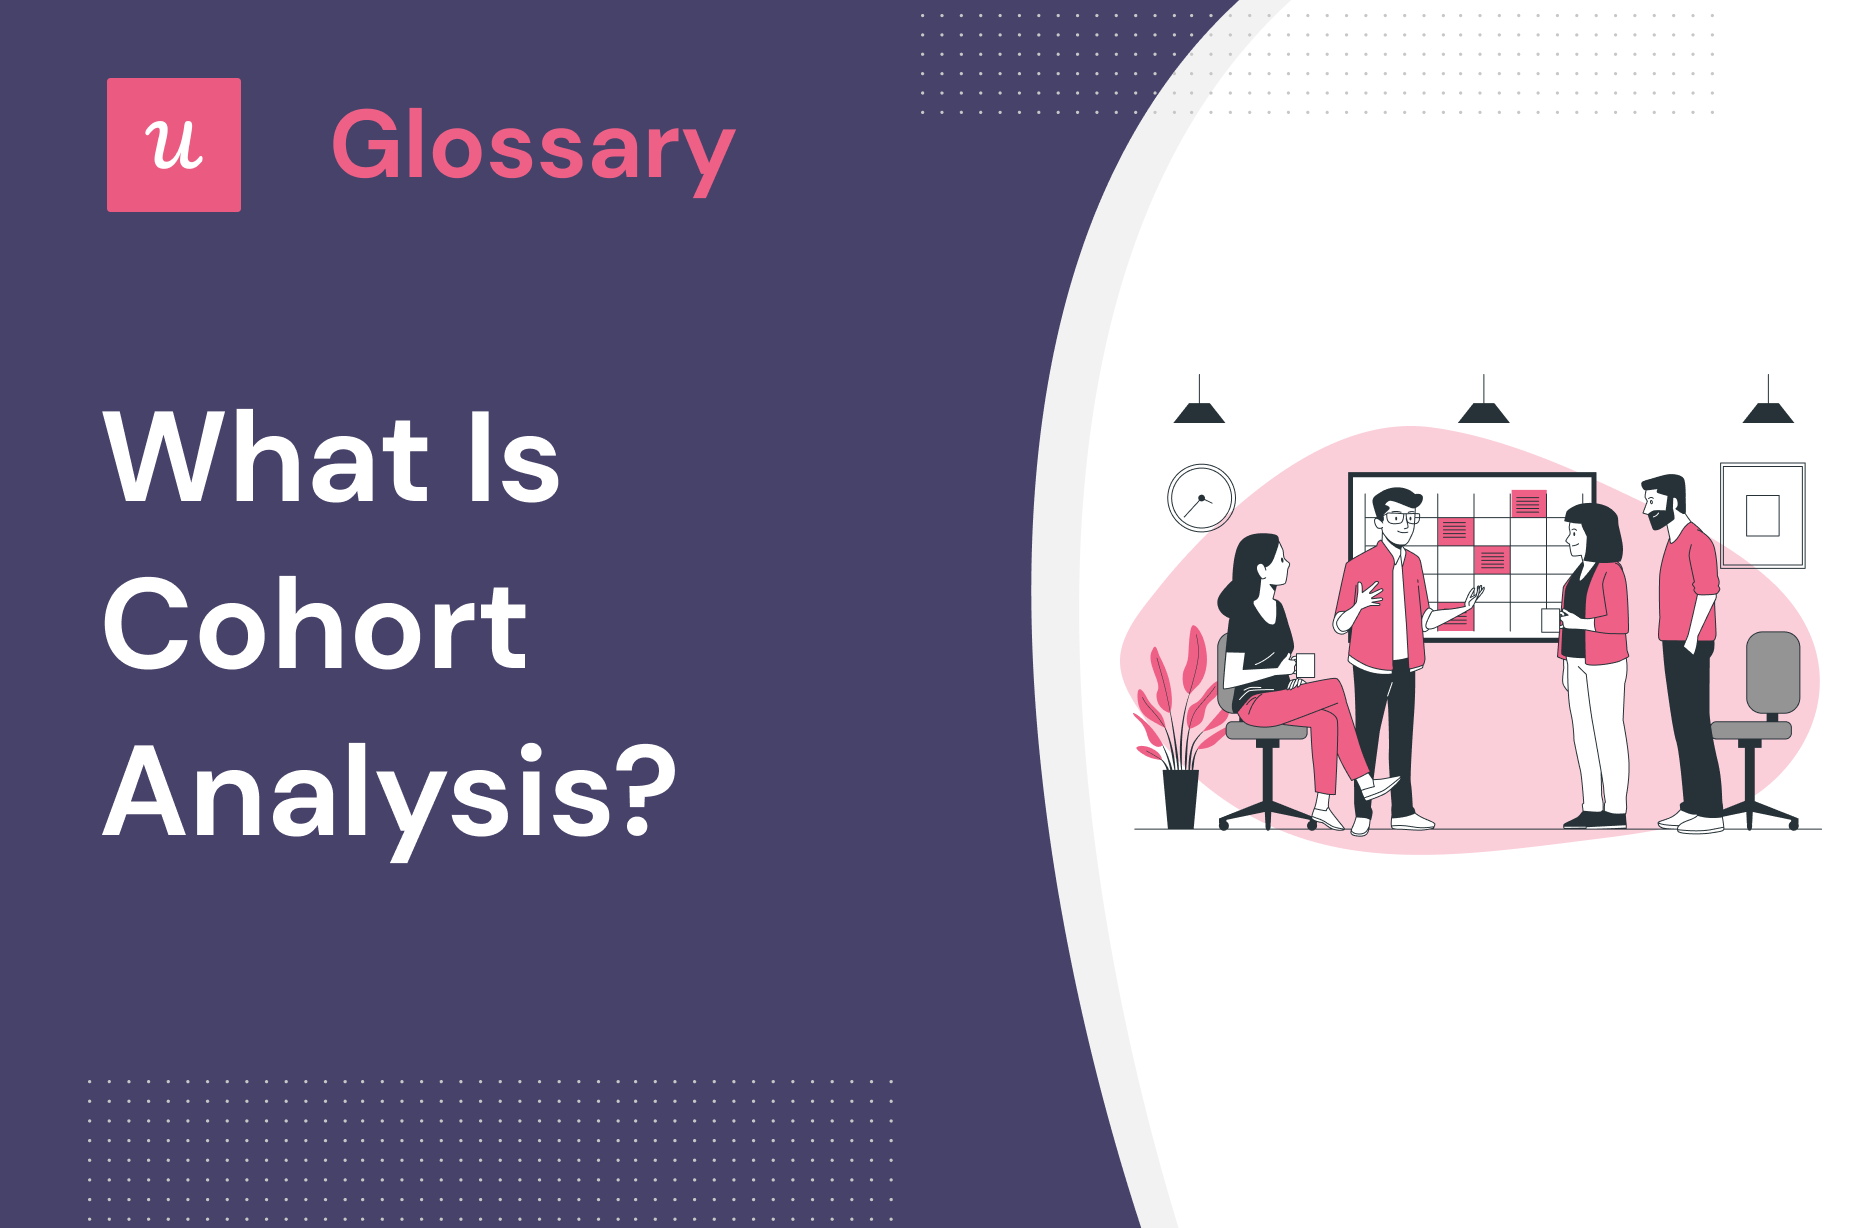 What is Cohort Analysis?